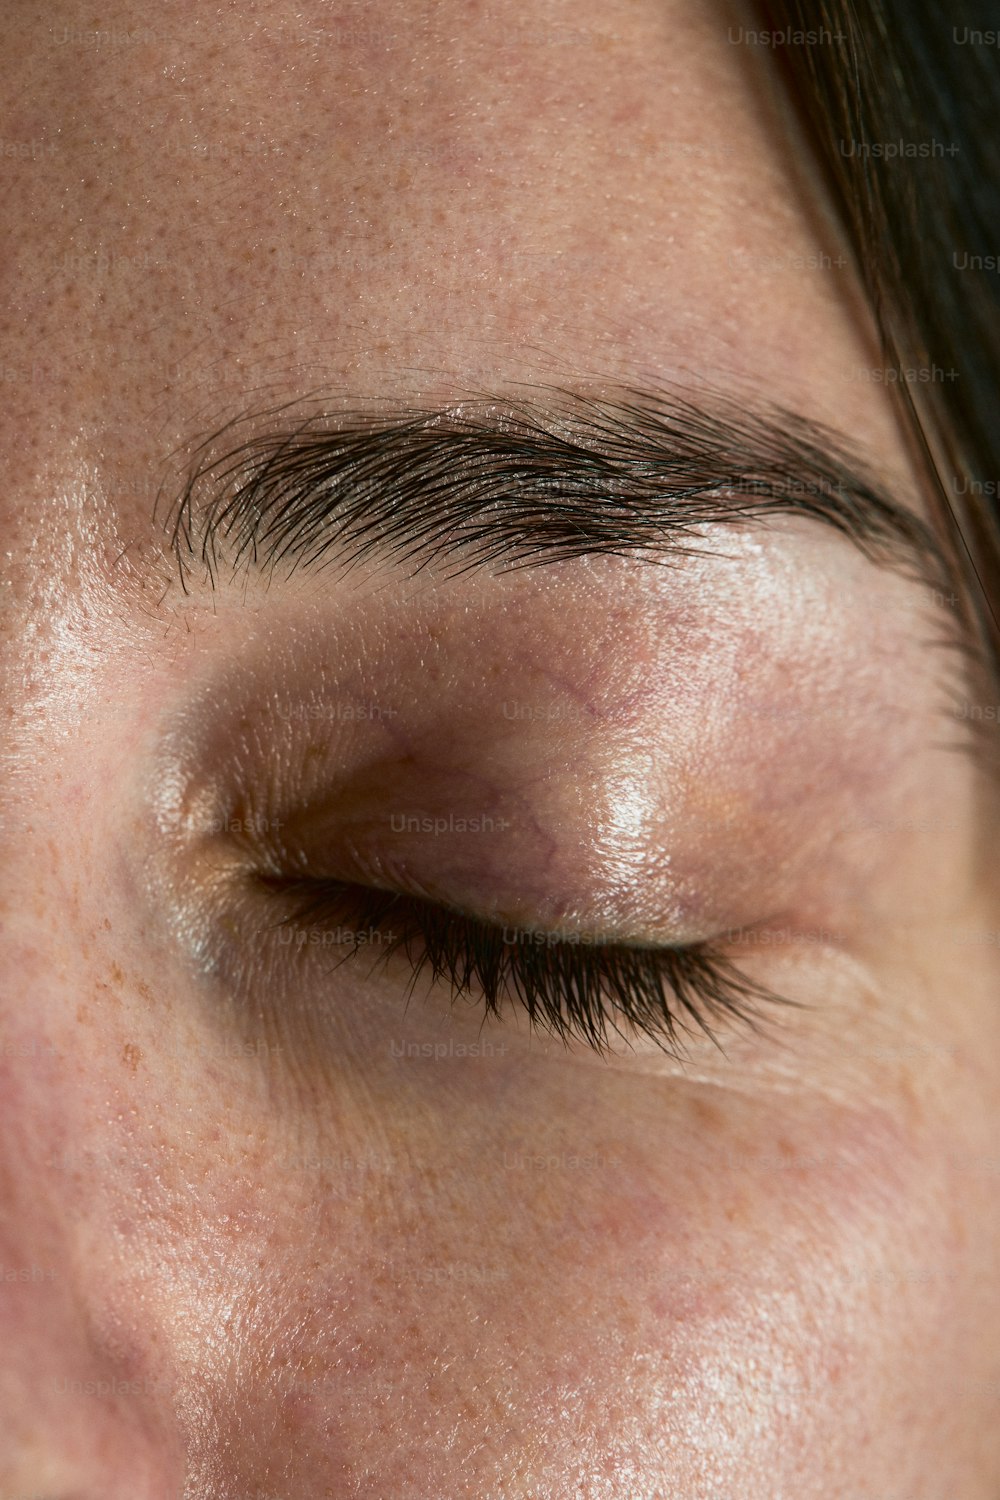 a close up of a person's eye with a brown spot on it